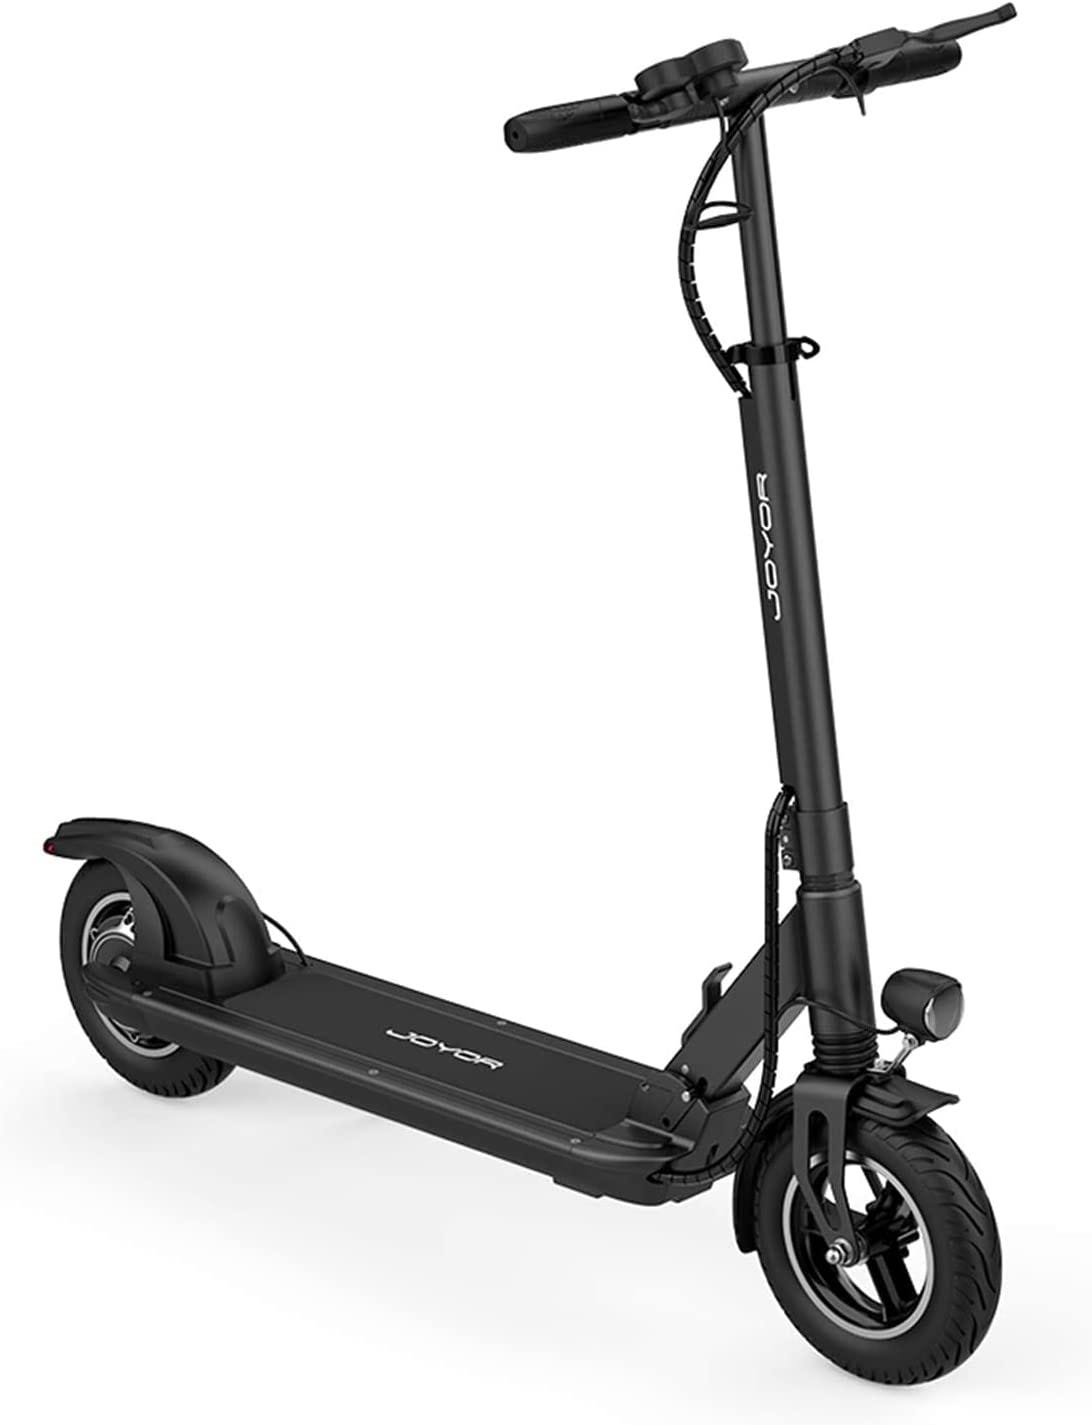 Joyor X5S Electric Scooter Review: Is It Worth Buying? | by Best-Scooters.com  | Medium